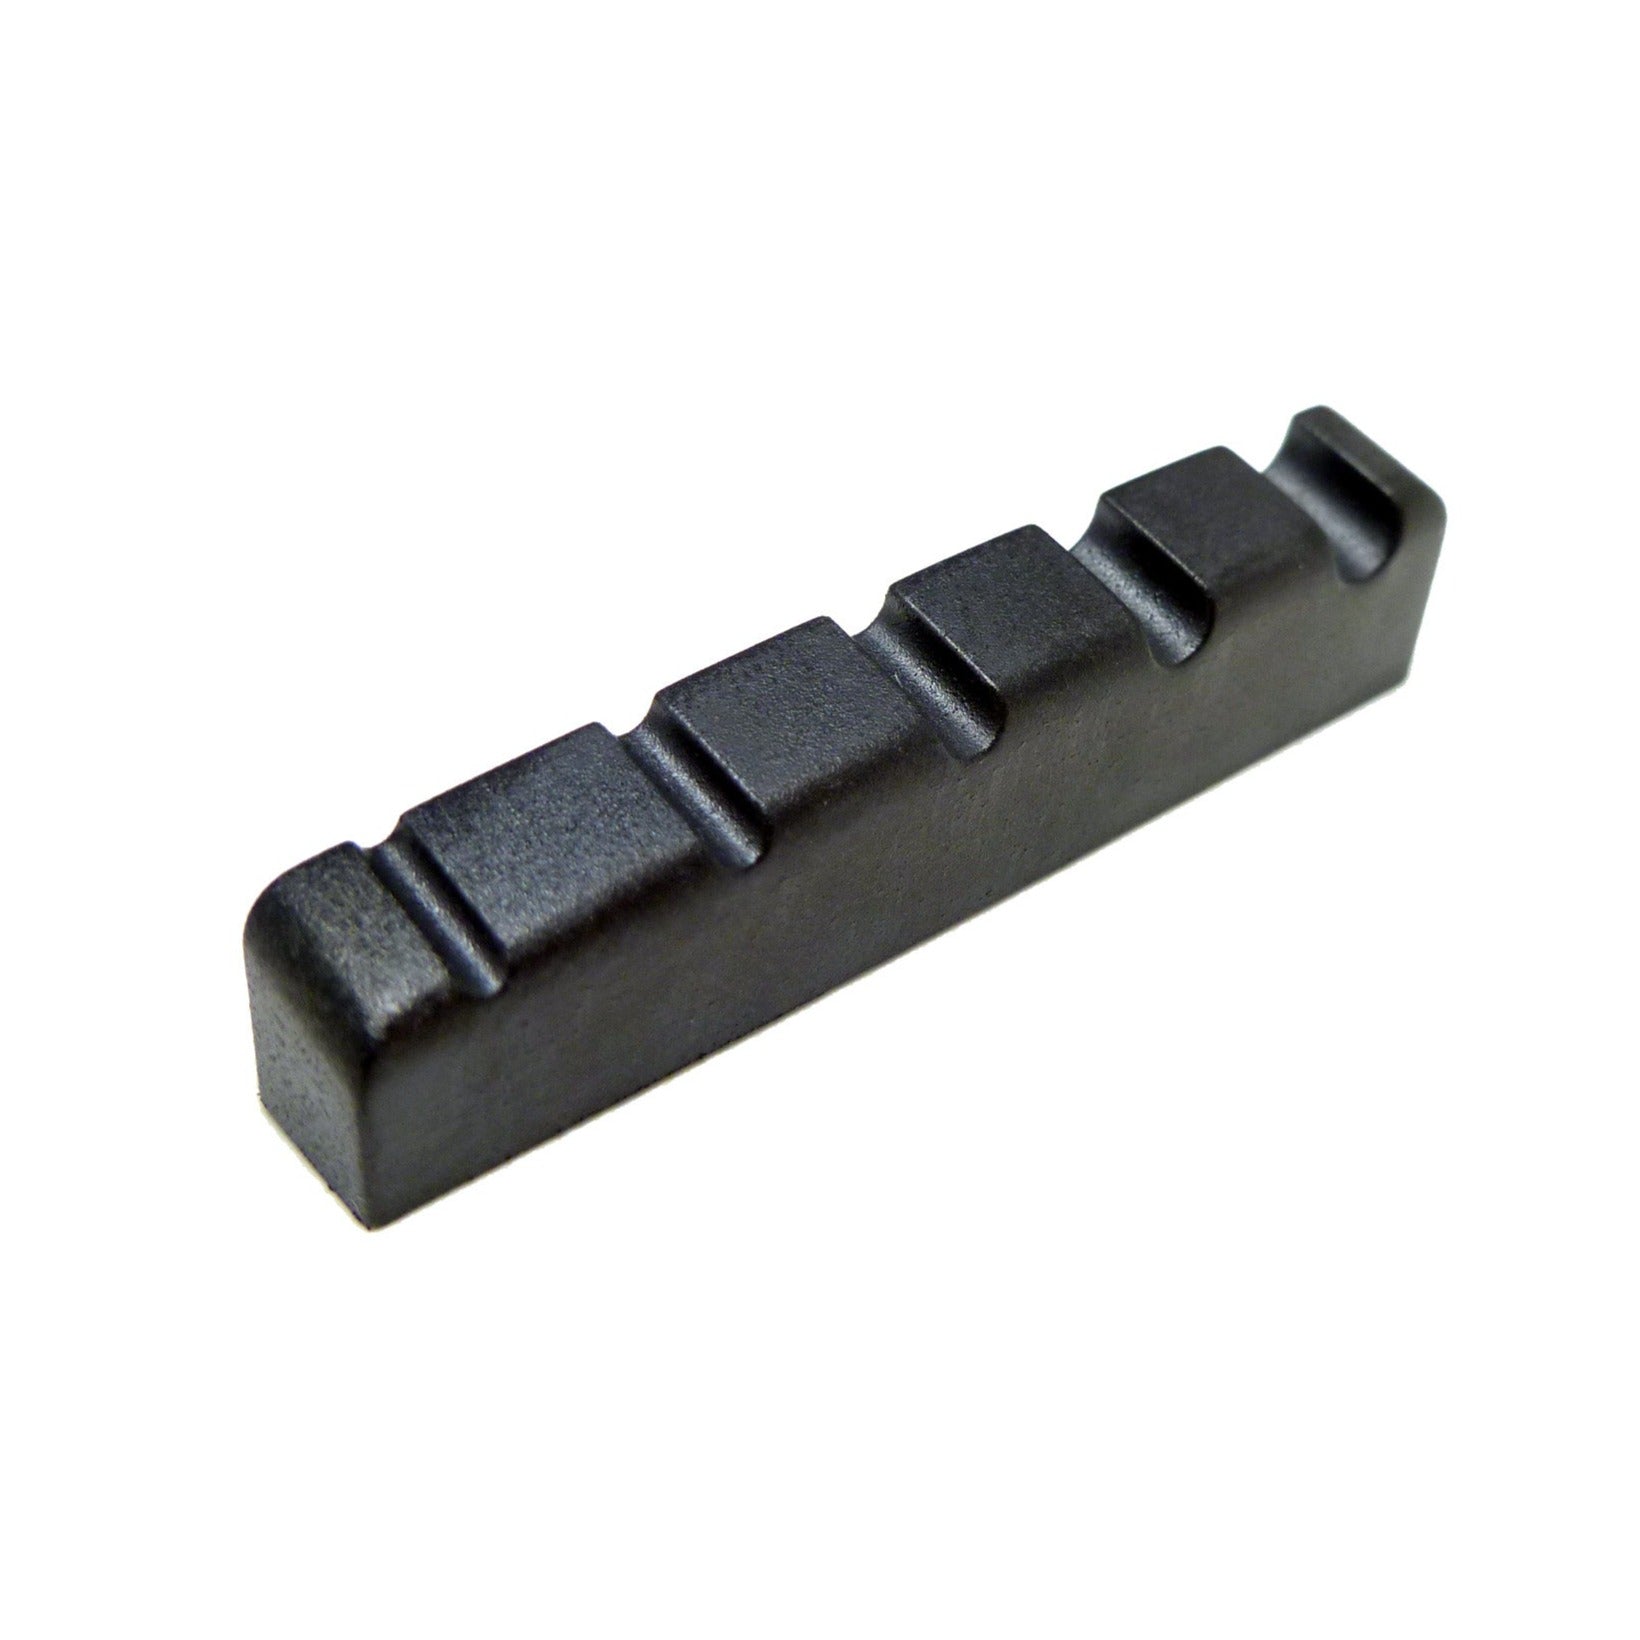 Model 1445-00 Nut Slotted L45.06mm